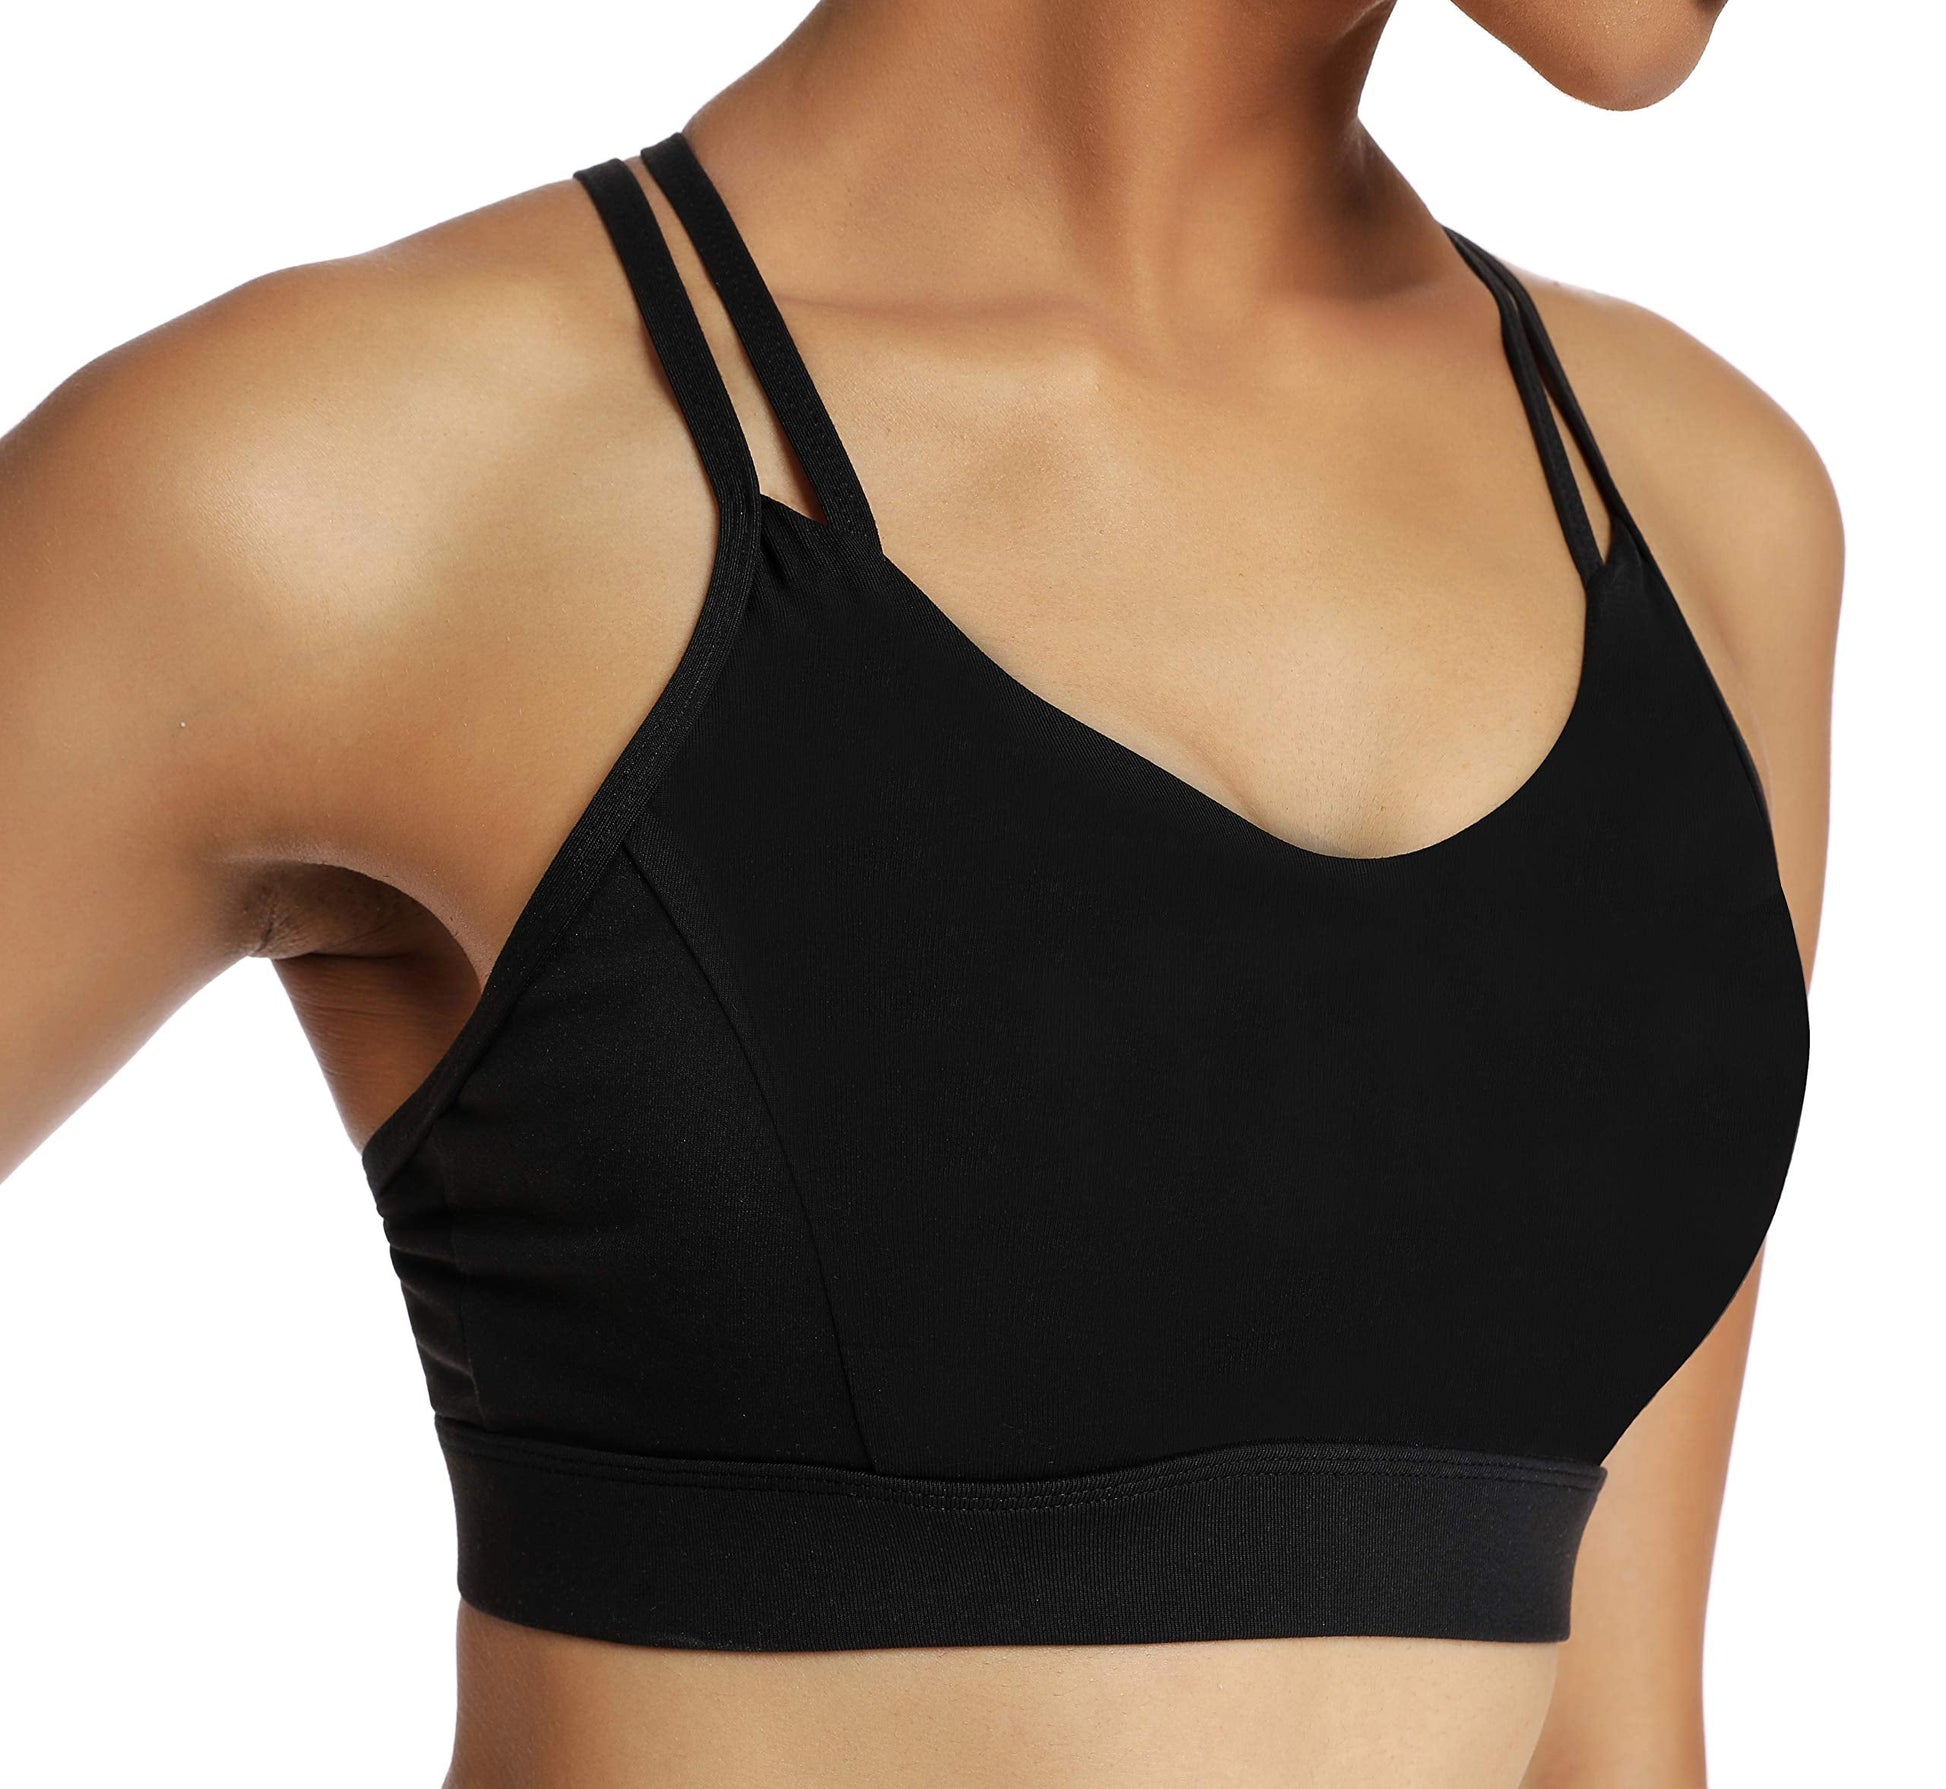 RUNNING GIRL Strappy Sports Bra for Women Sexy Crisscross Back Light  Support Yoga Bra with Removable Cups(WX2310.Black.S) at  Women's  Clothing store